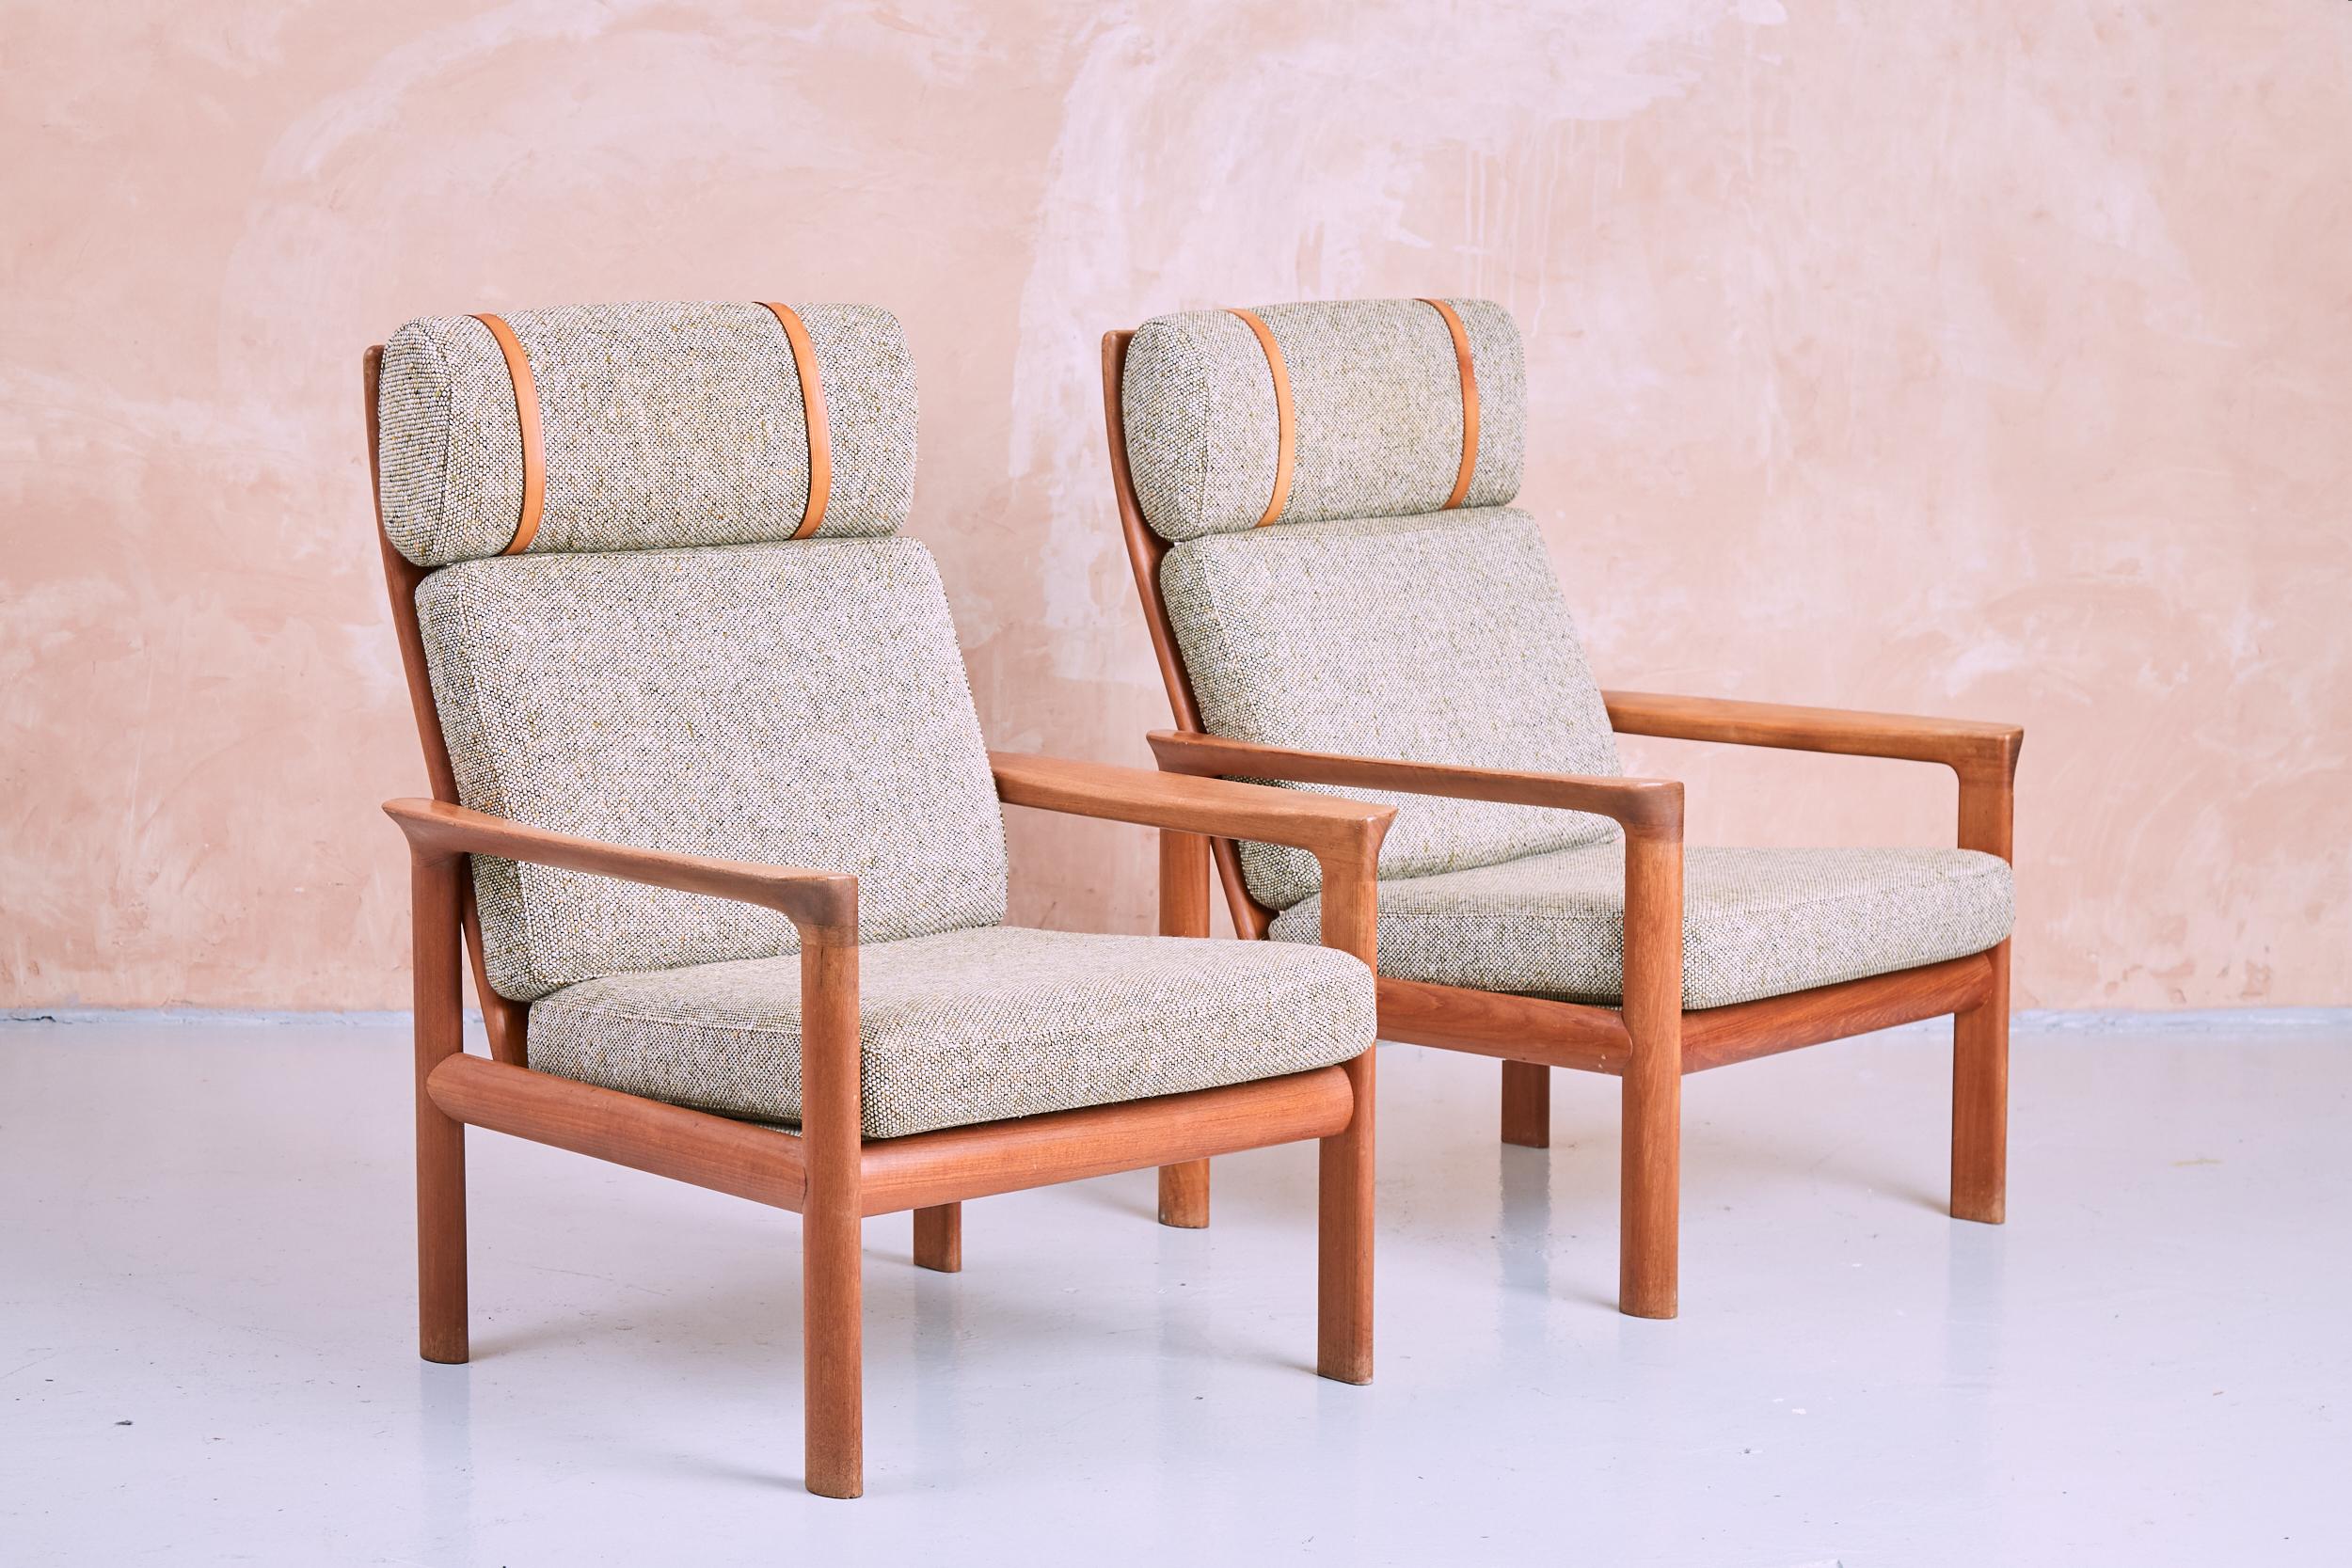 Beautiful design classic high backed 'Borneo' armchairs by Danish designer Sven Ellekaer for Komfort, manufactured in the 1960s. 

